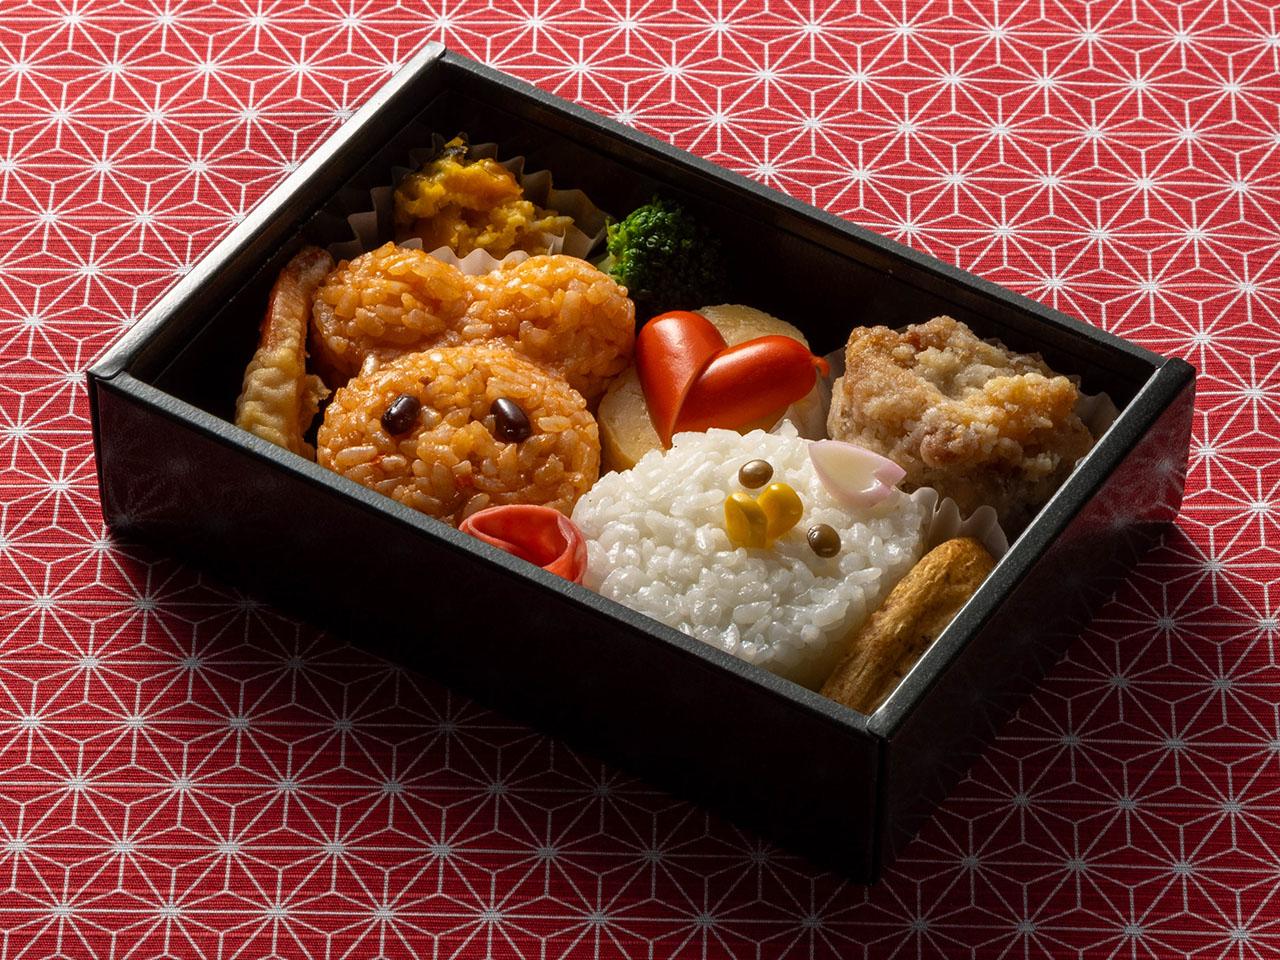 Photograph of in-flight meal Kawaii Lunch Box